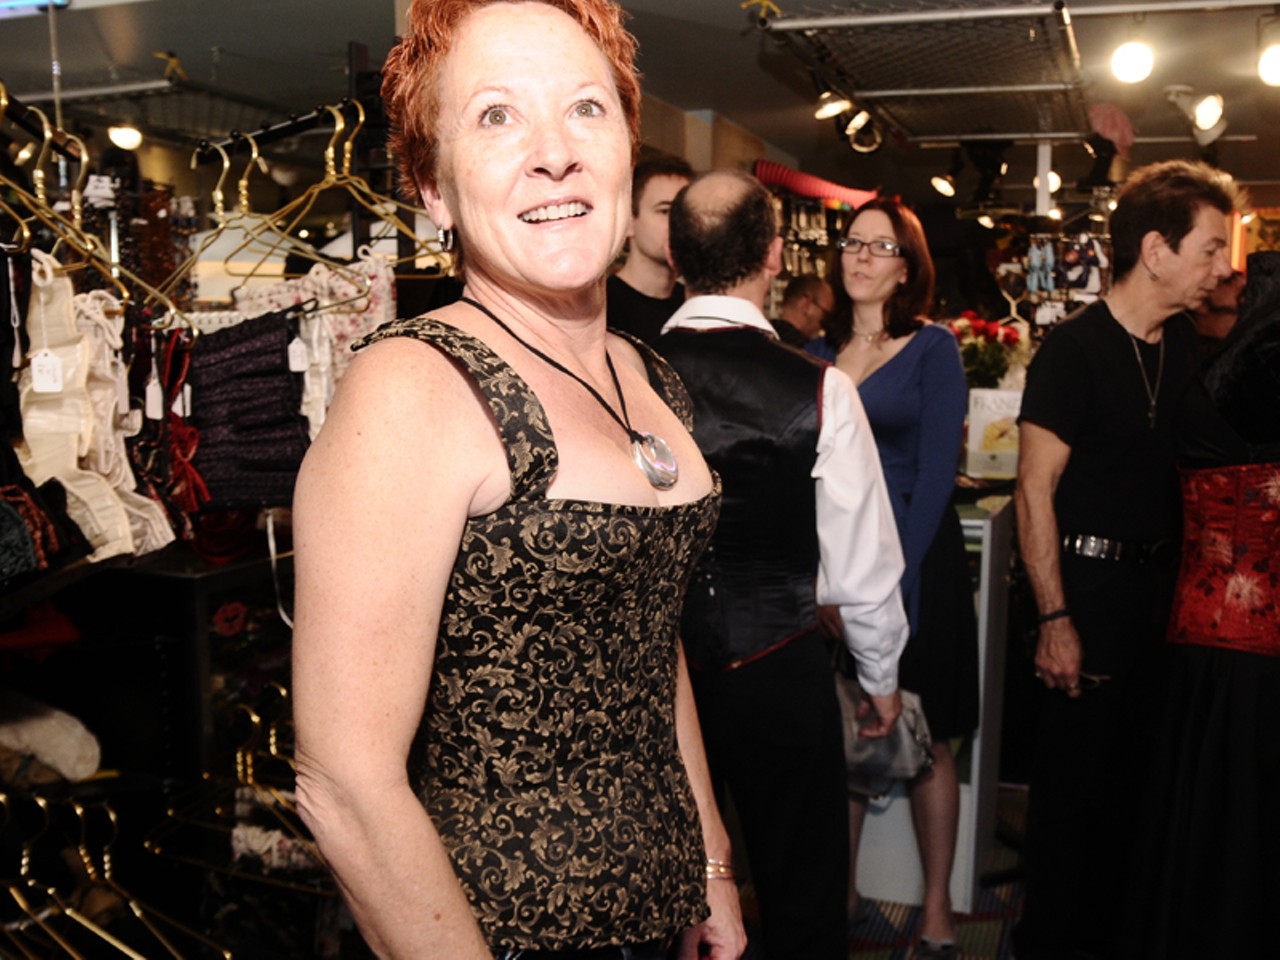 Fifty-year-old Pam is buying her first corset because she "feels sexy in every single way."